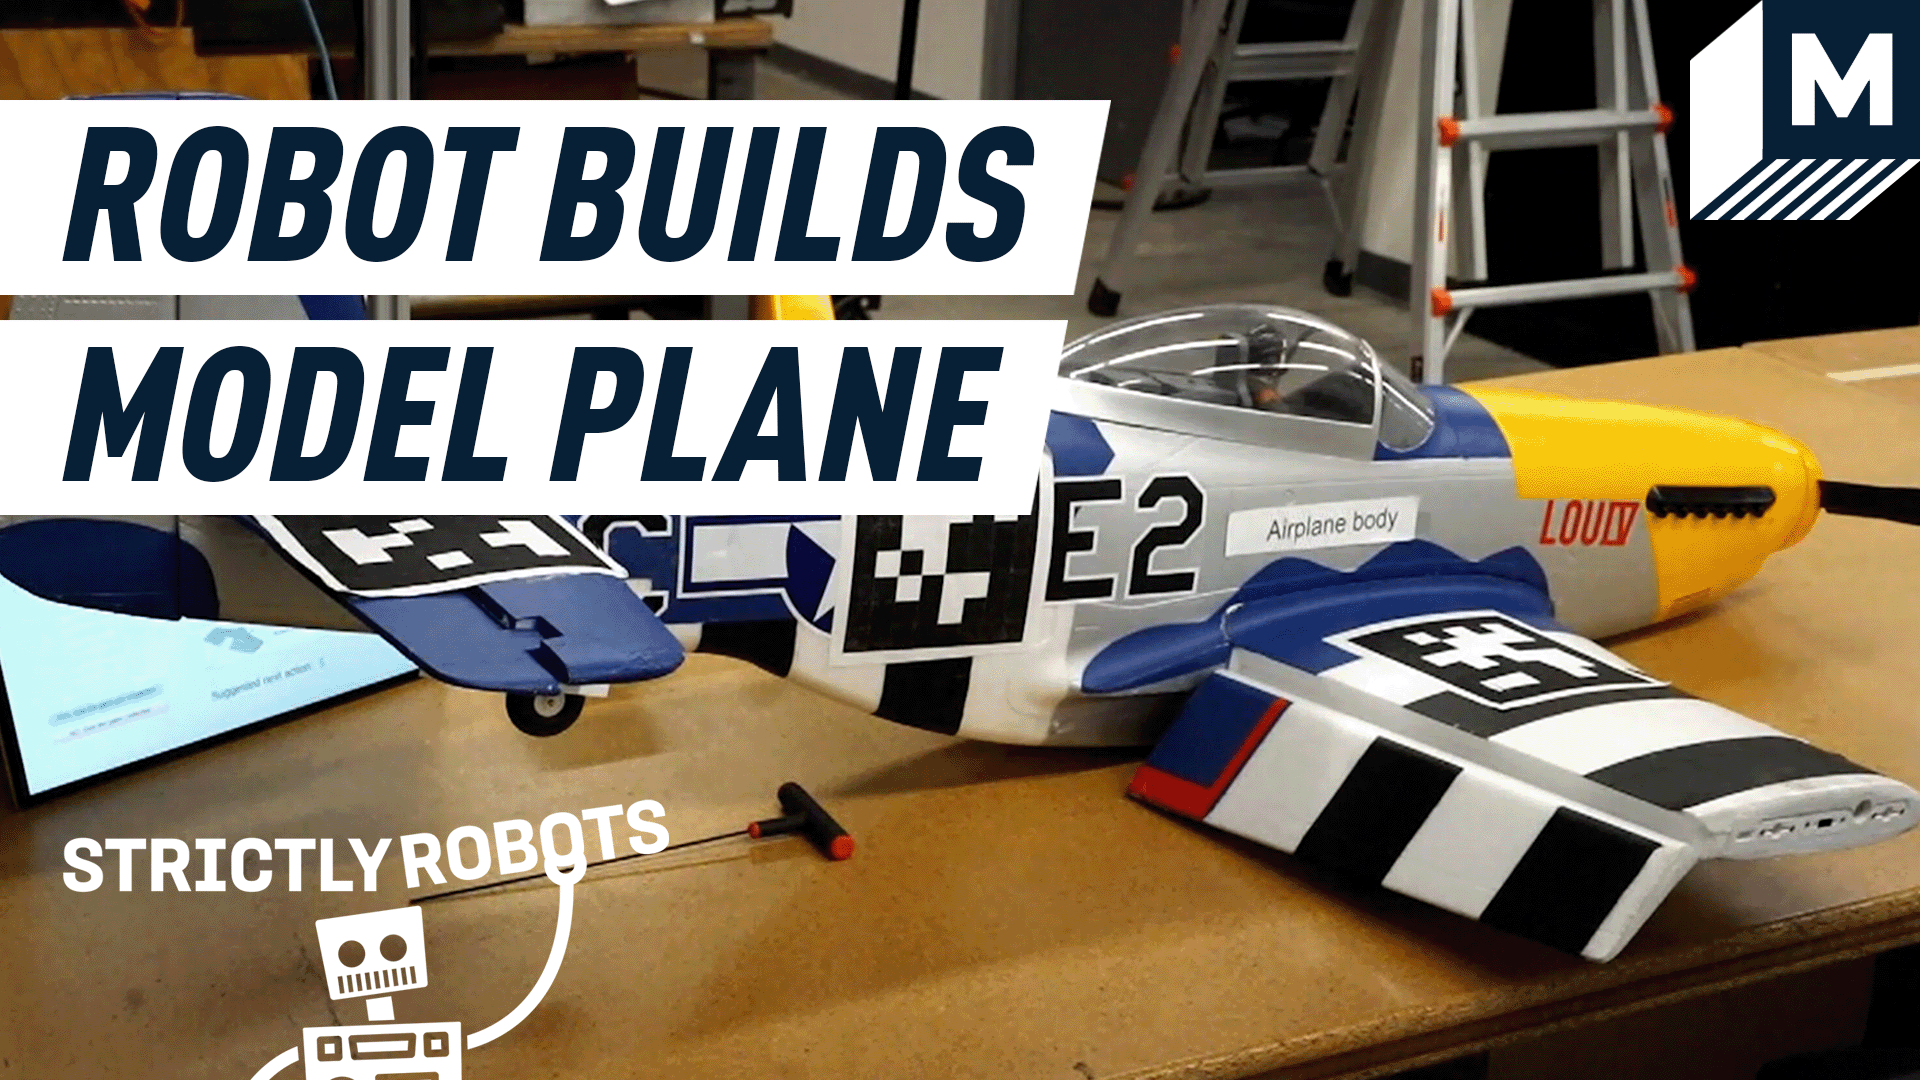 A finished model airplane built by a human and their robot assistant.